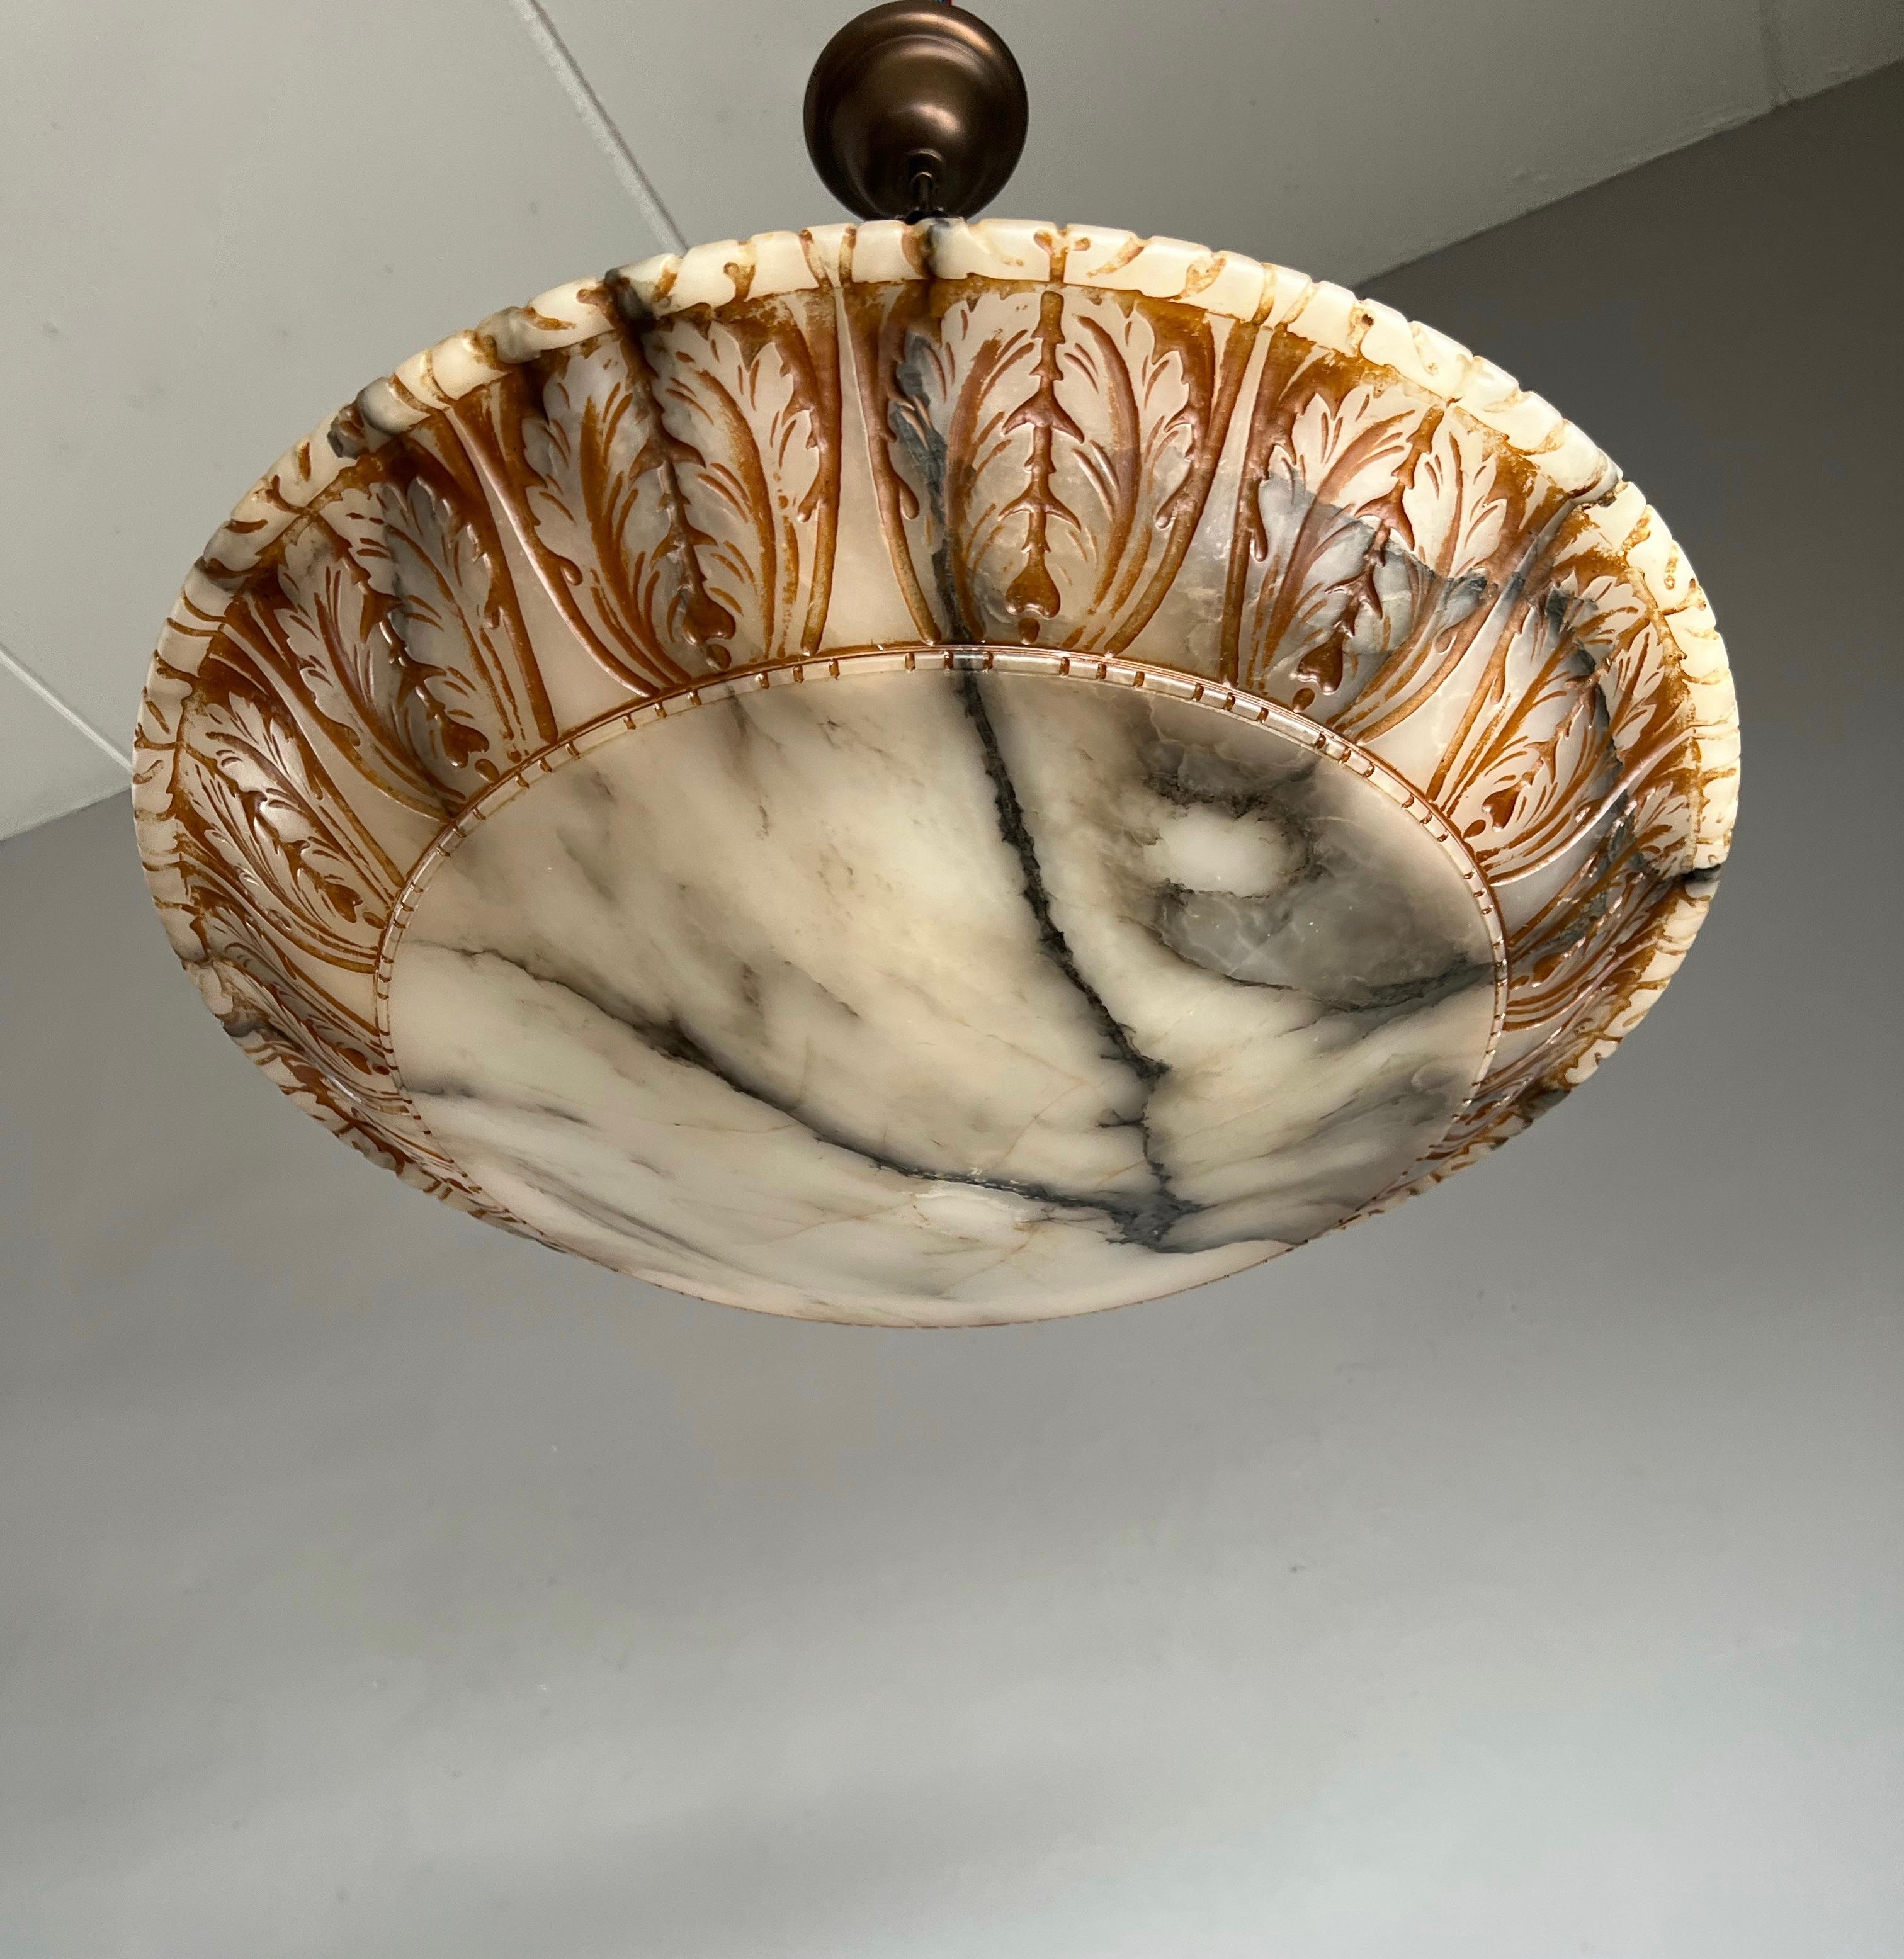 Remarkable size and unique design, hand carved, antique marble-like alabaster pendant light.

Thanks to its very large size & deep shade this remarkable alabaster chandelier is another one of our recent great finds that will light up both your days